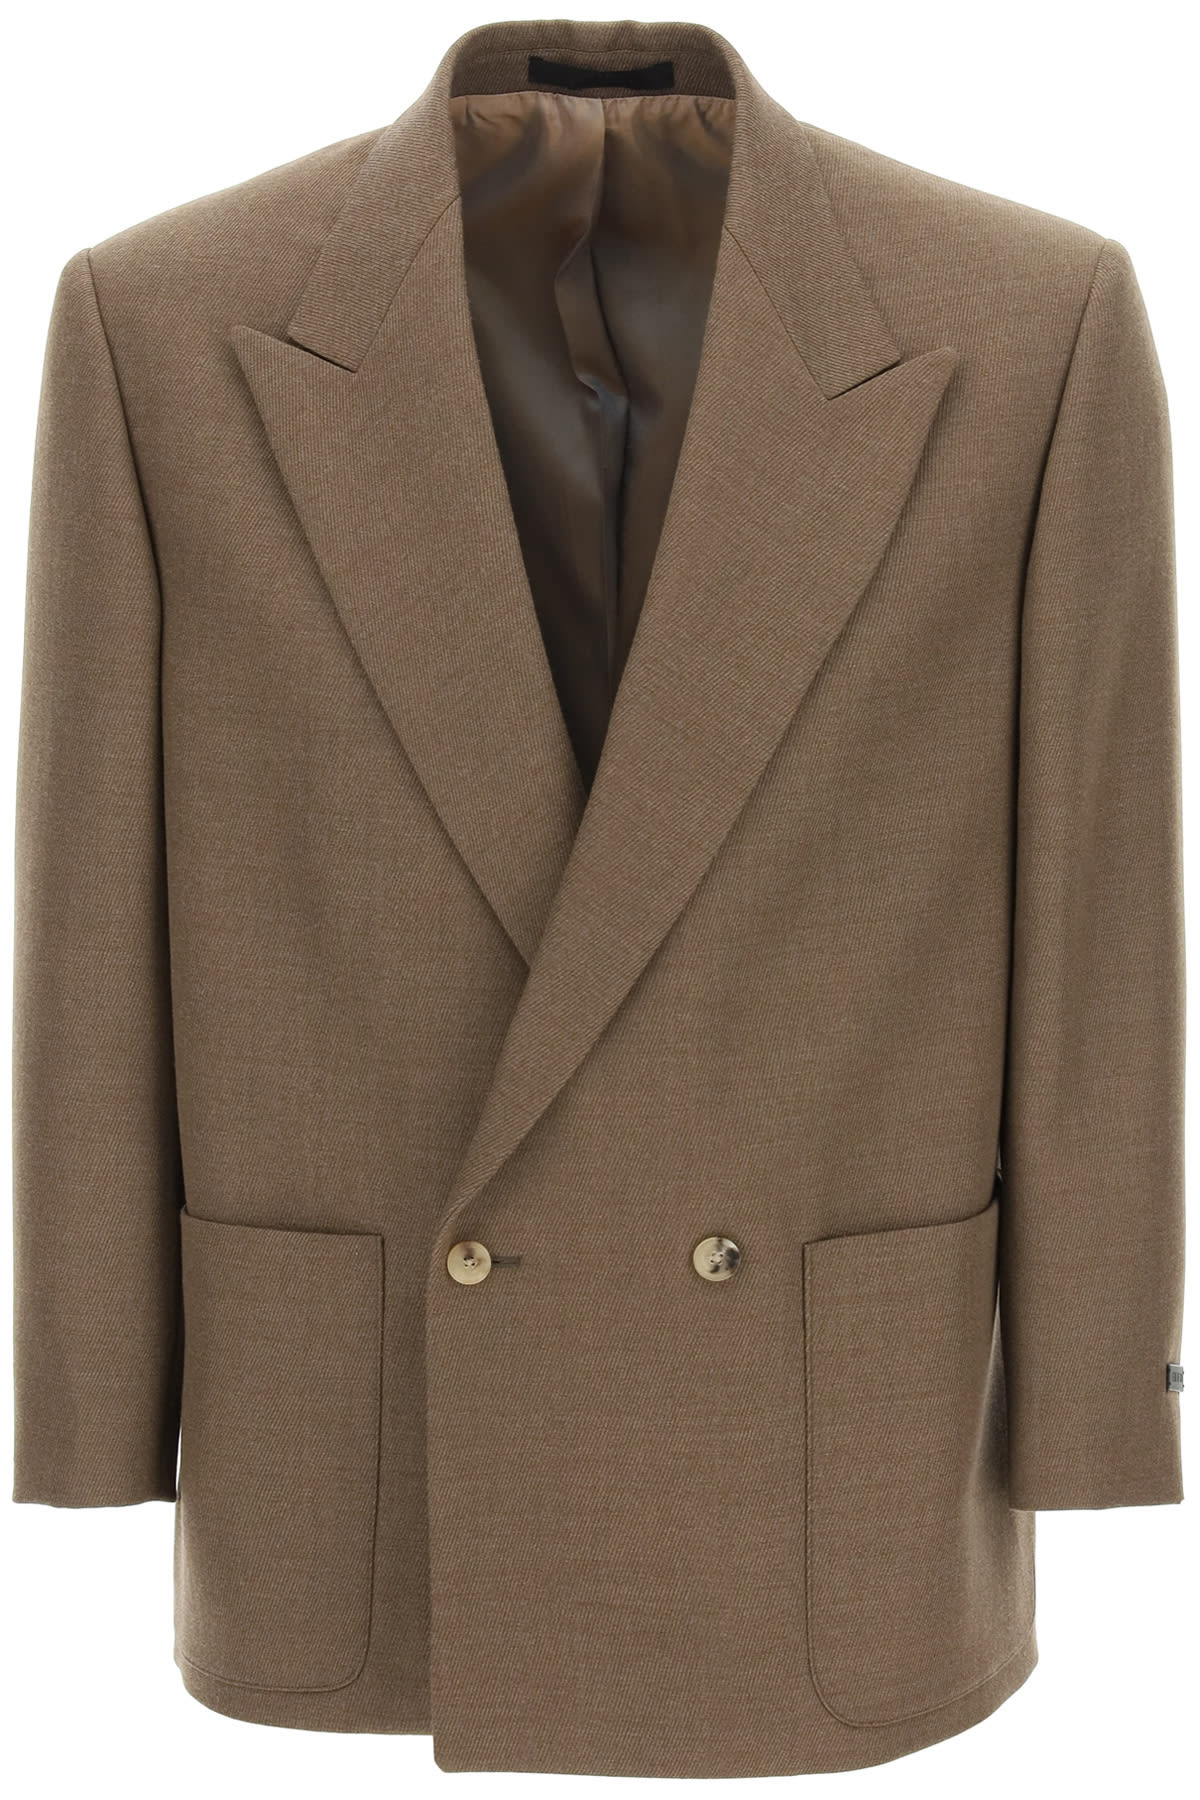 Fear of God The Suit Jacket